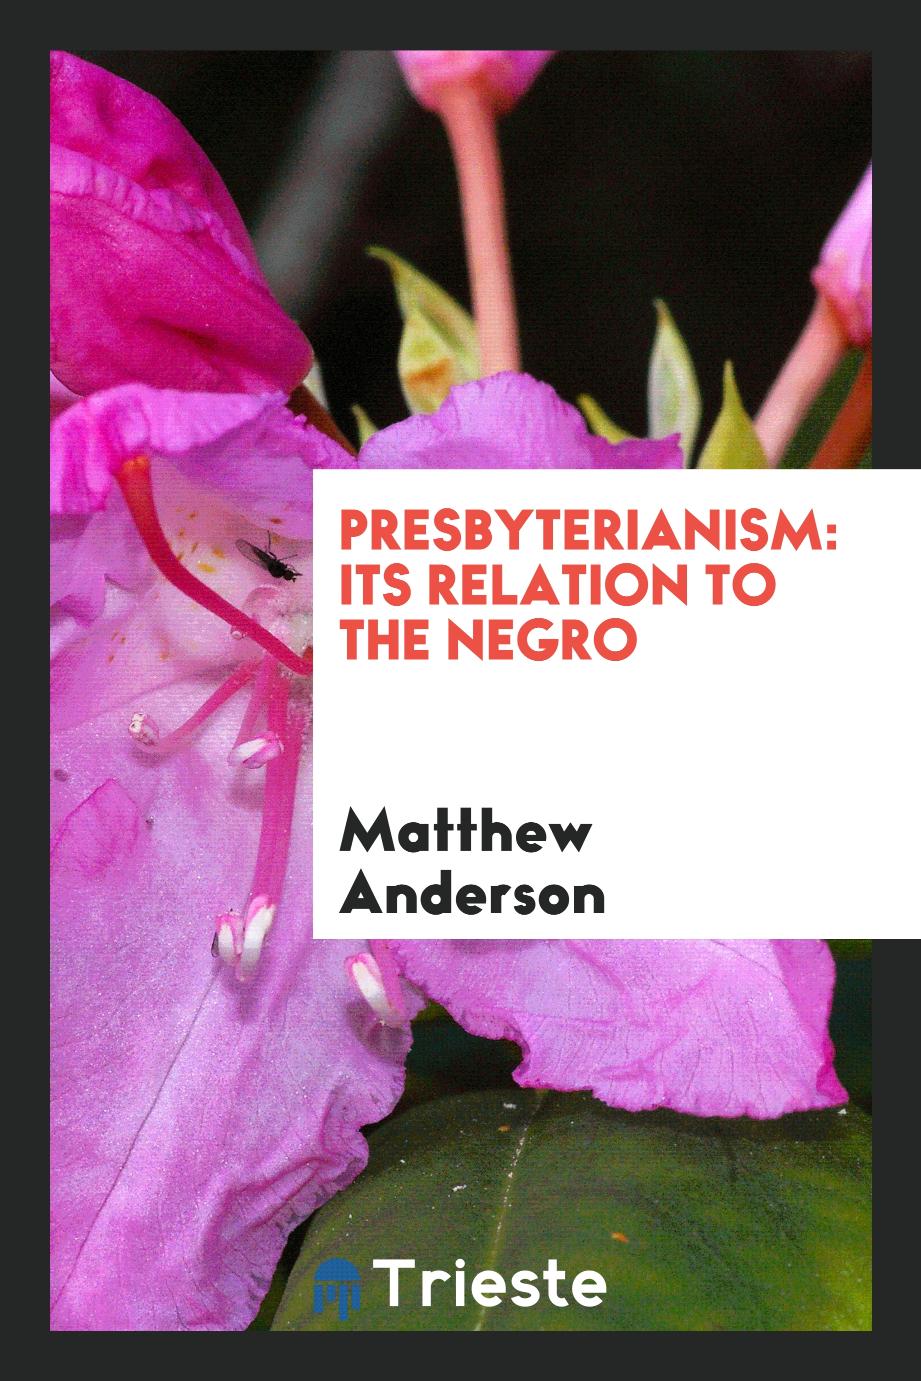 Presbyterianism: its relation to the Negro